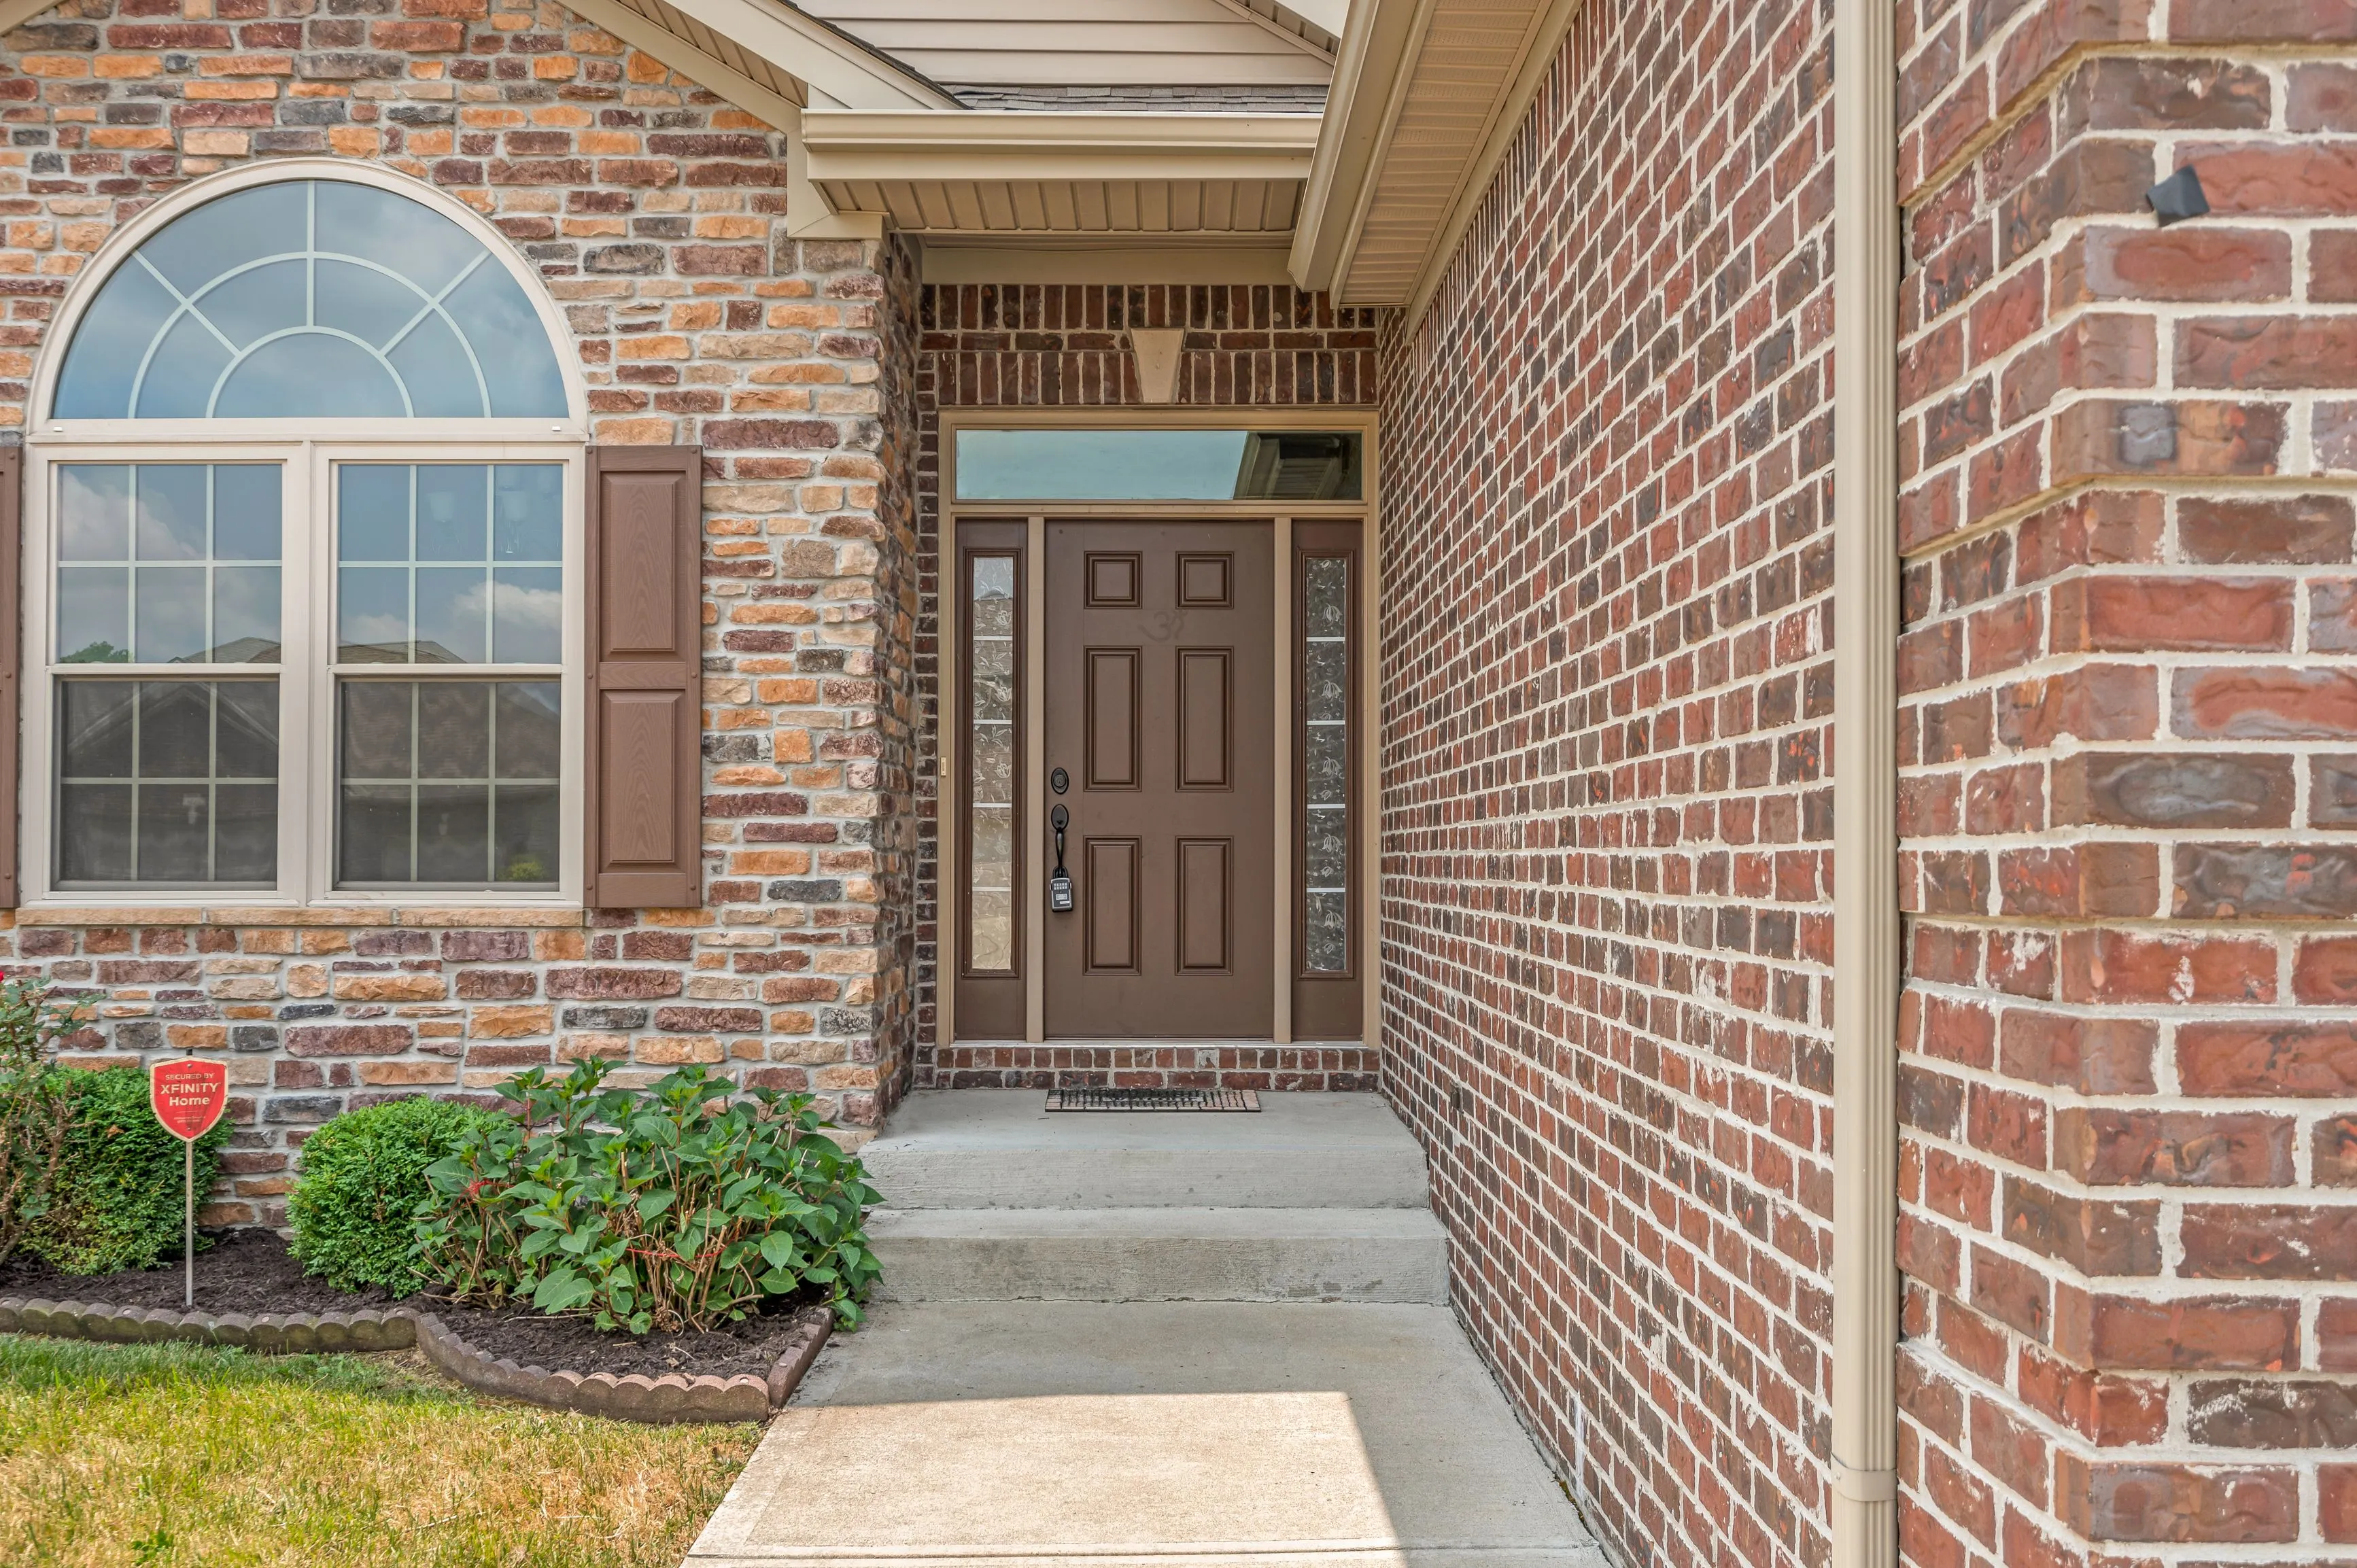 Exterior view of a residential home entrance with a brown door, brick walls, and a pathway leading up to the porch.